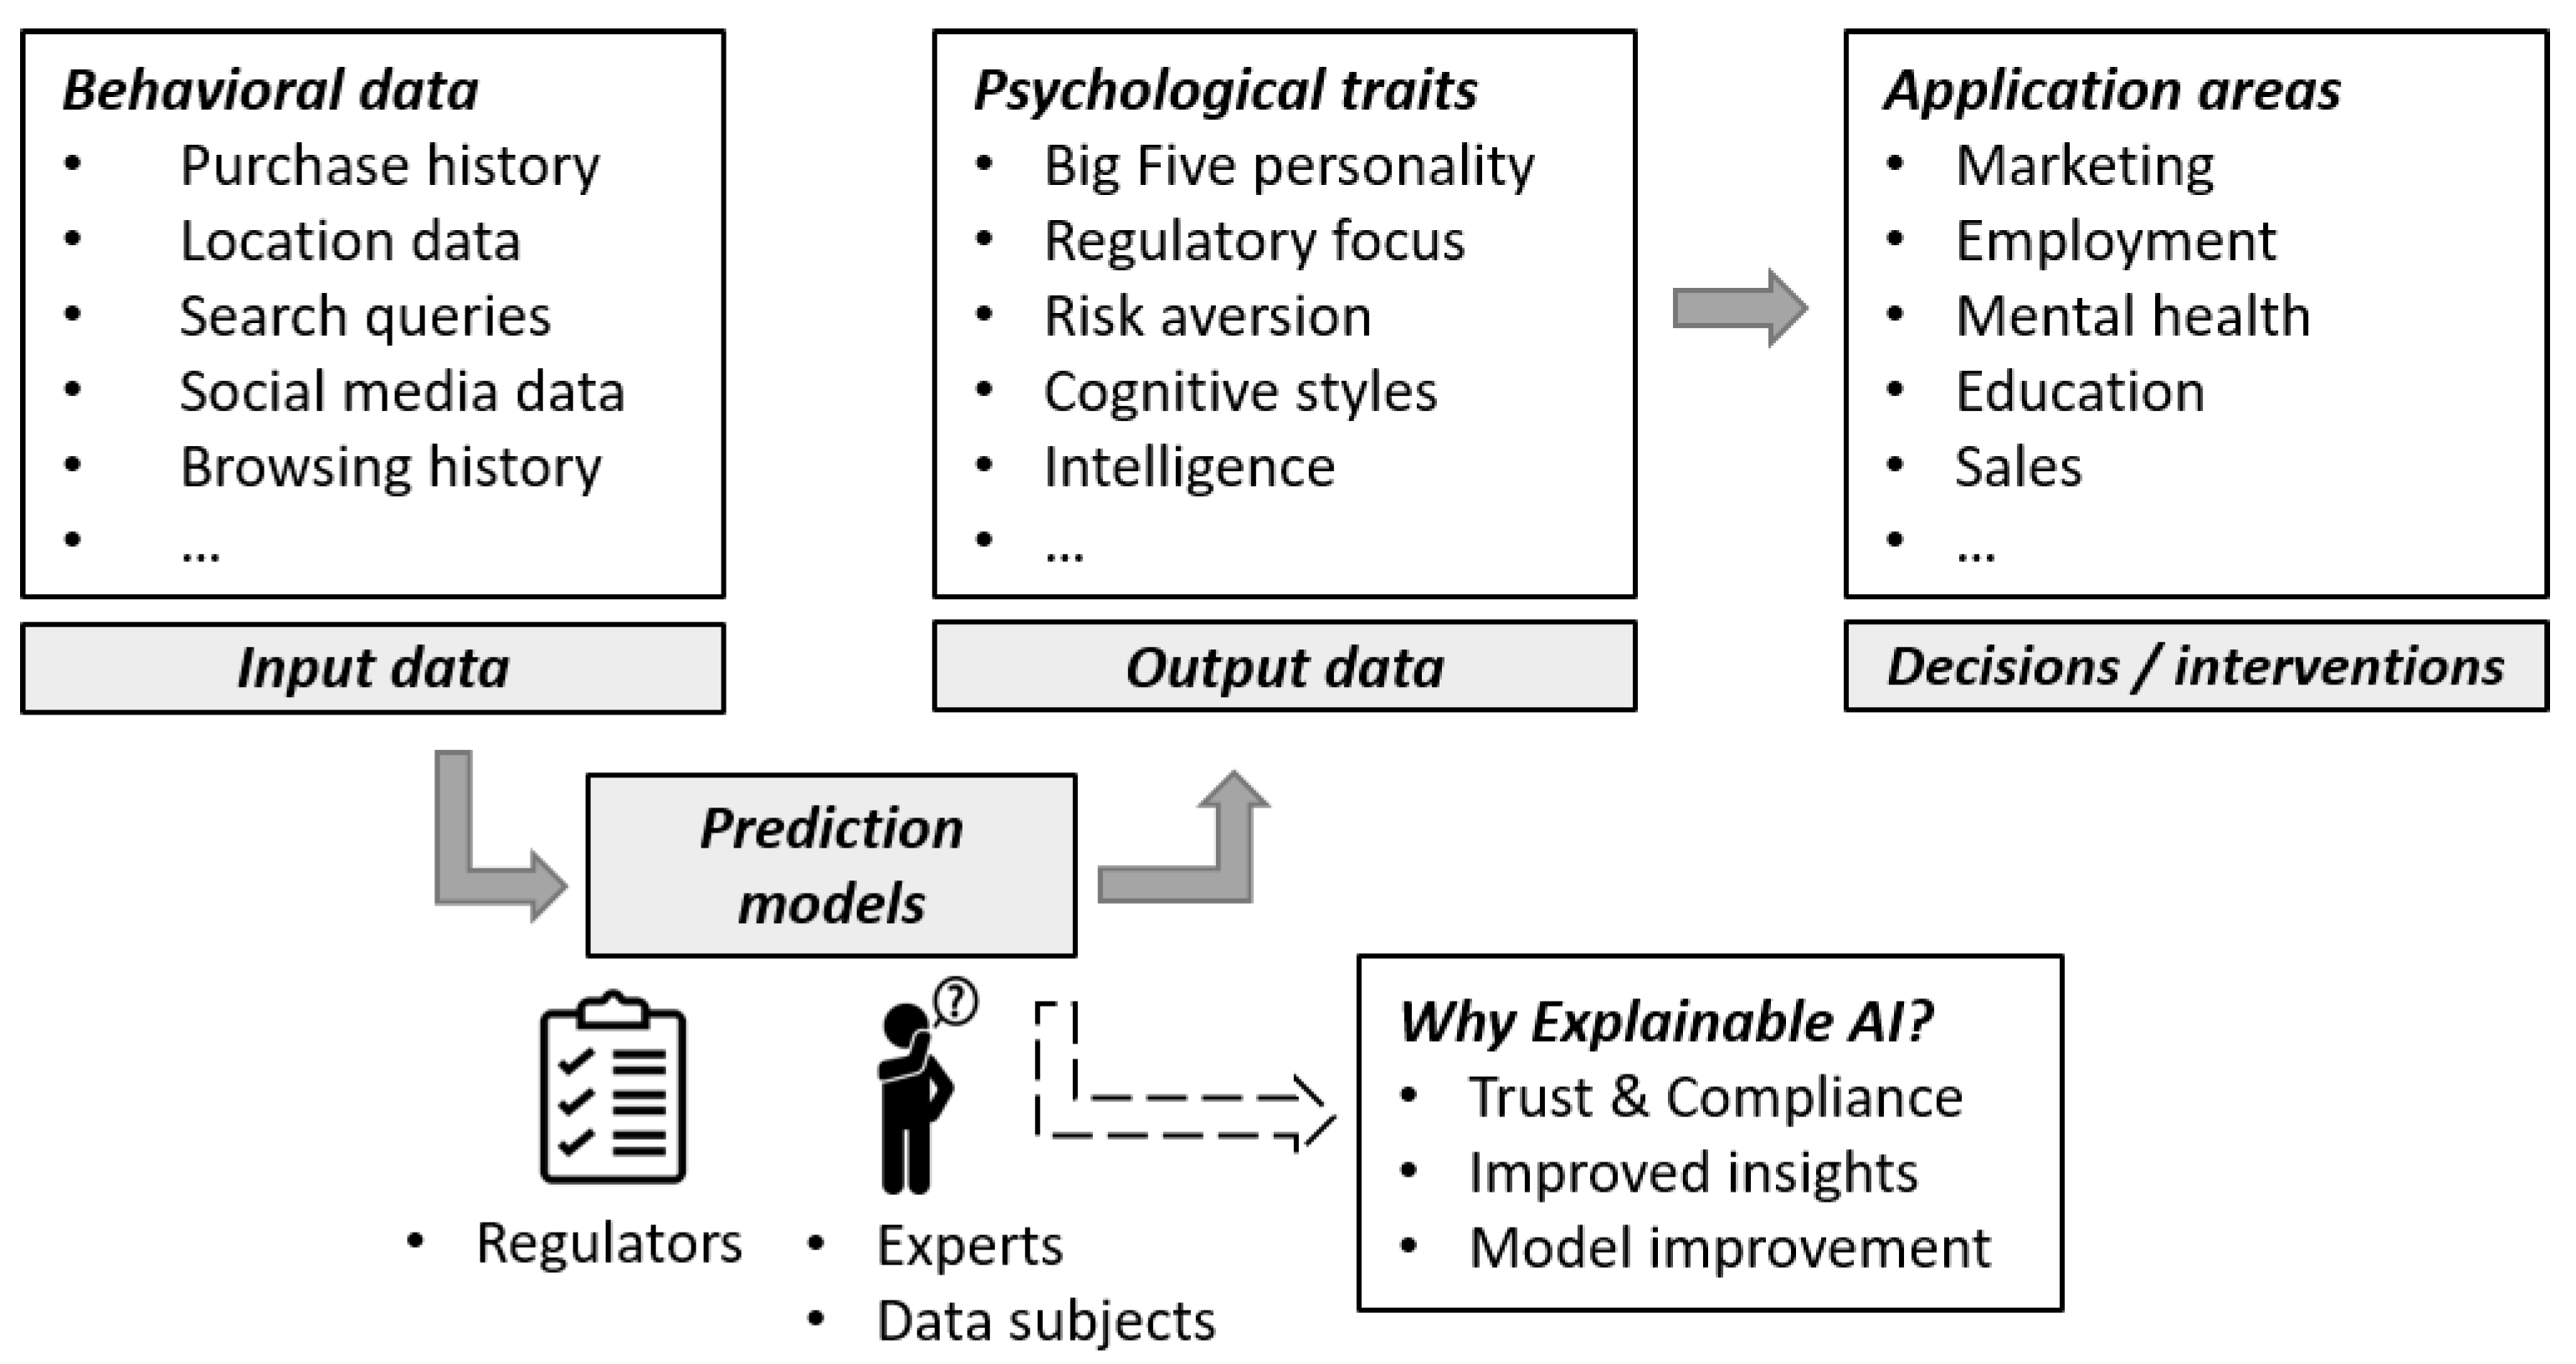 Personality in information systems professions: identifying archetypal  professions with suitable traits and candidates' ability to fake-good these  traits